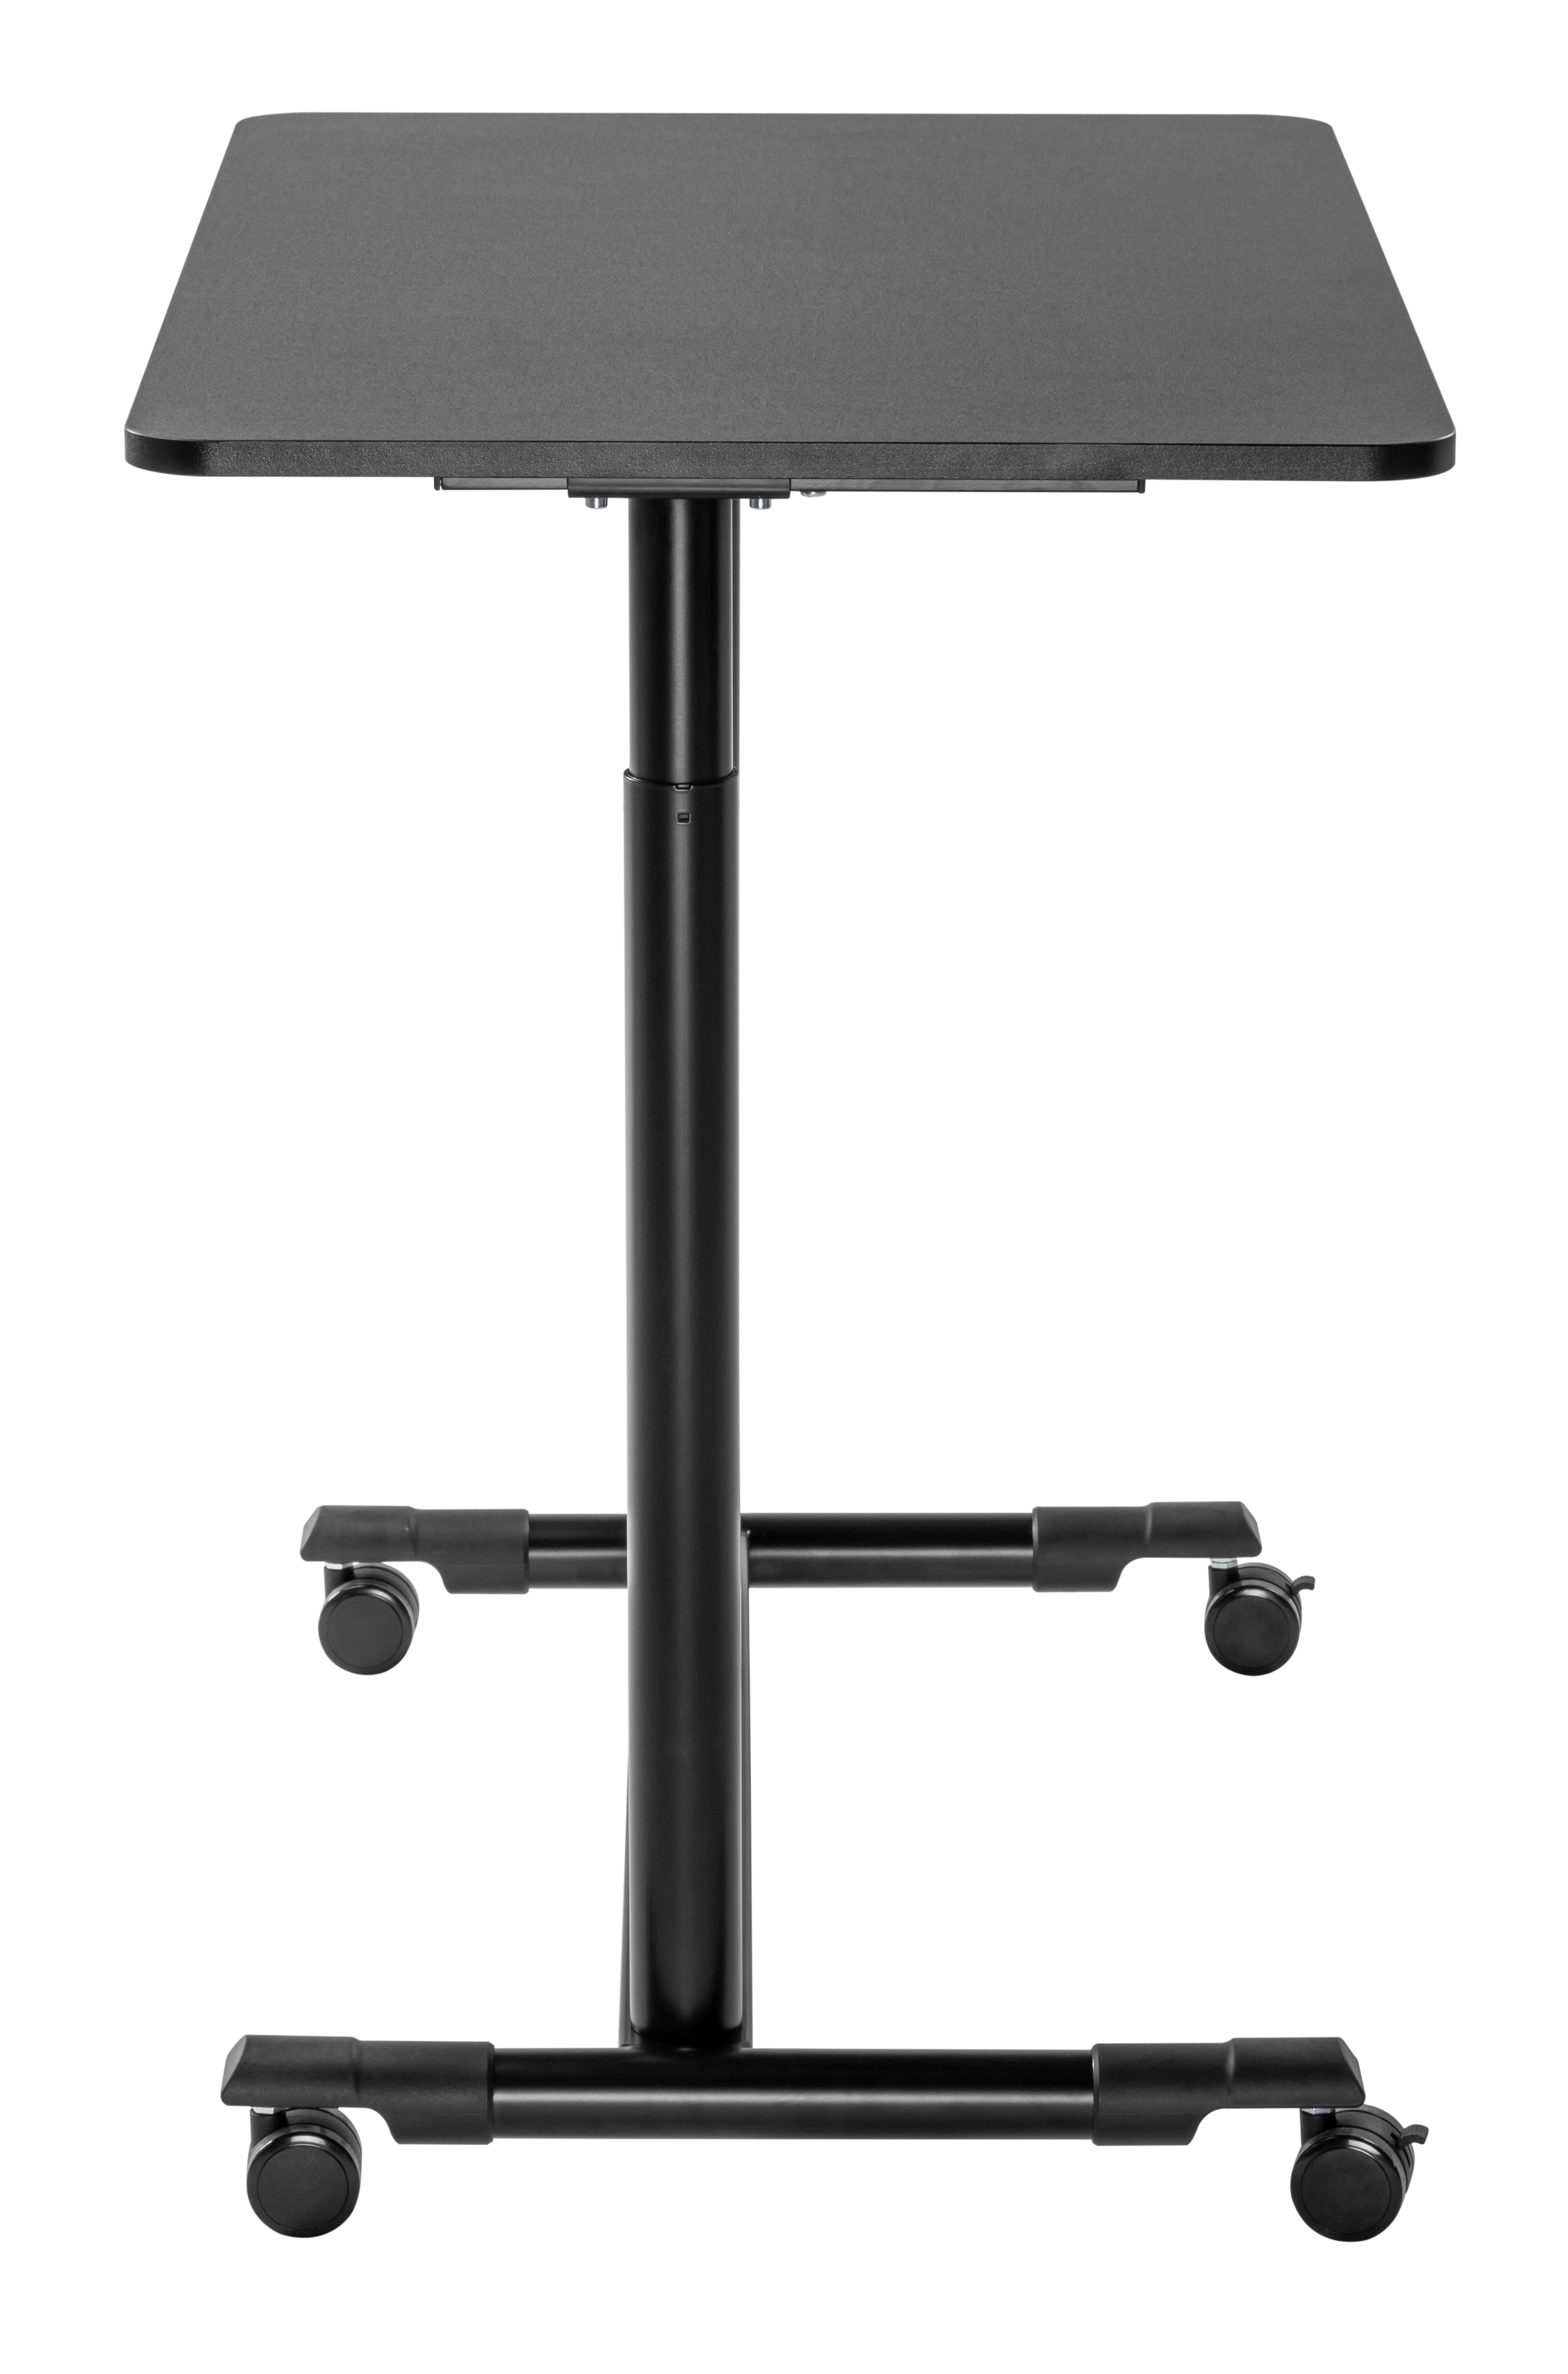 Compact Height Adjustable Portable Mobile Laptop Computer Workstation Office Sit Stand Desk 915 x 560mm on wheels